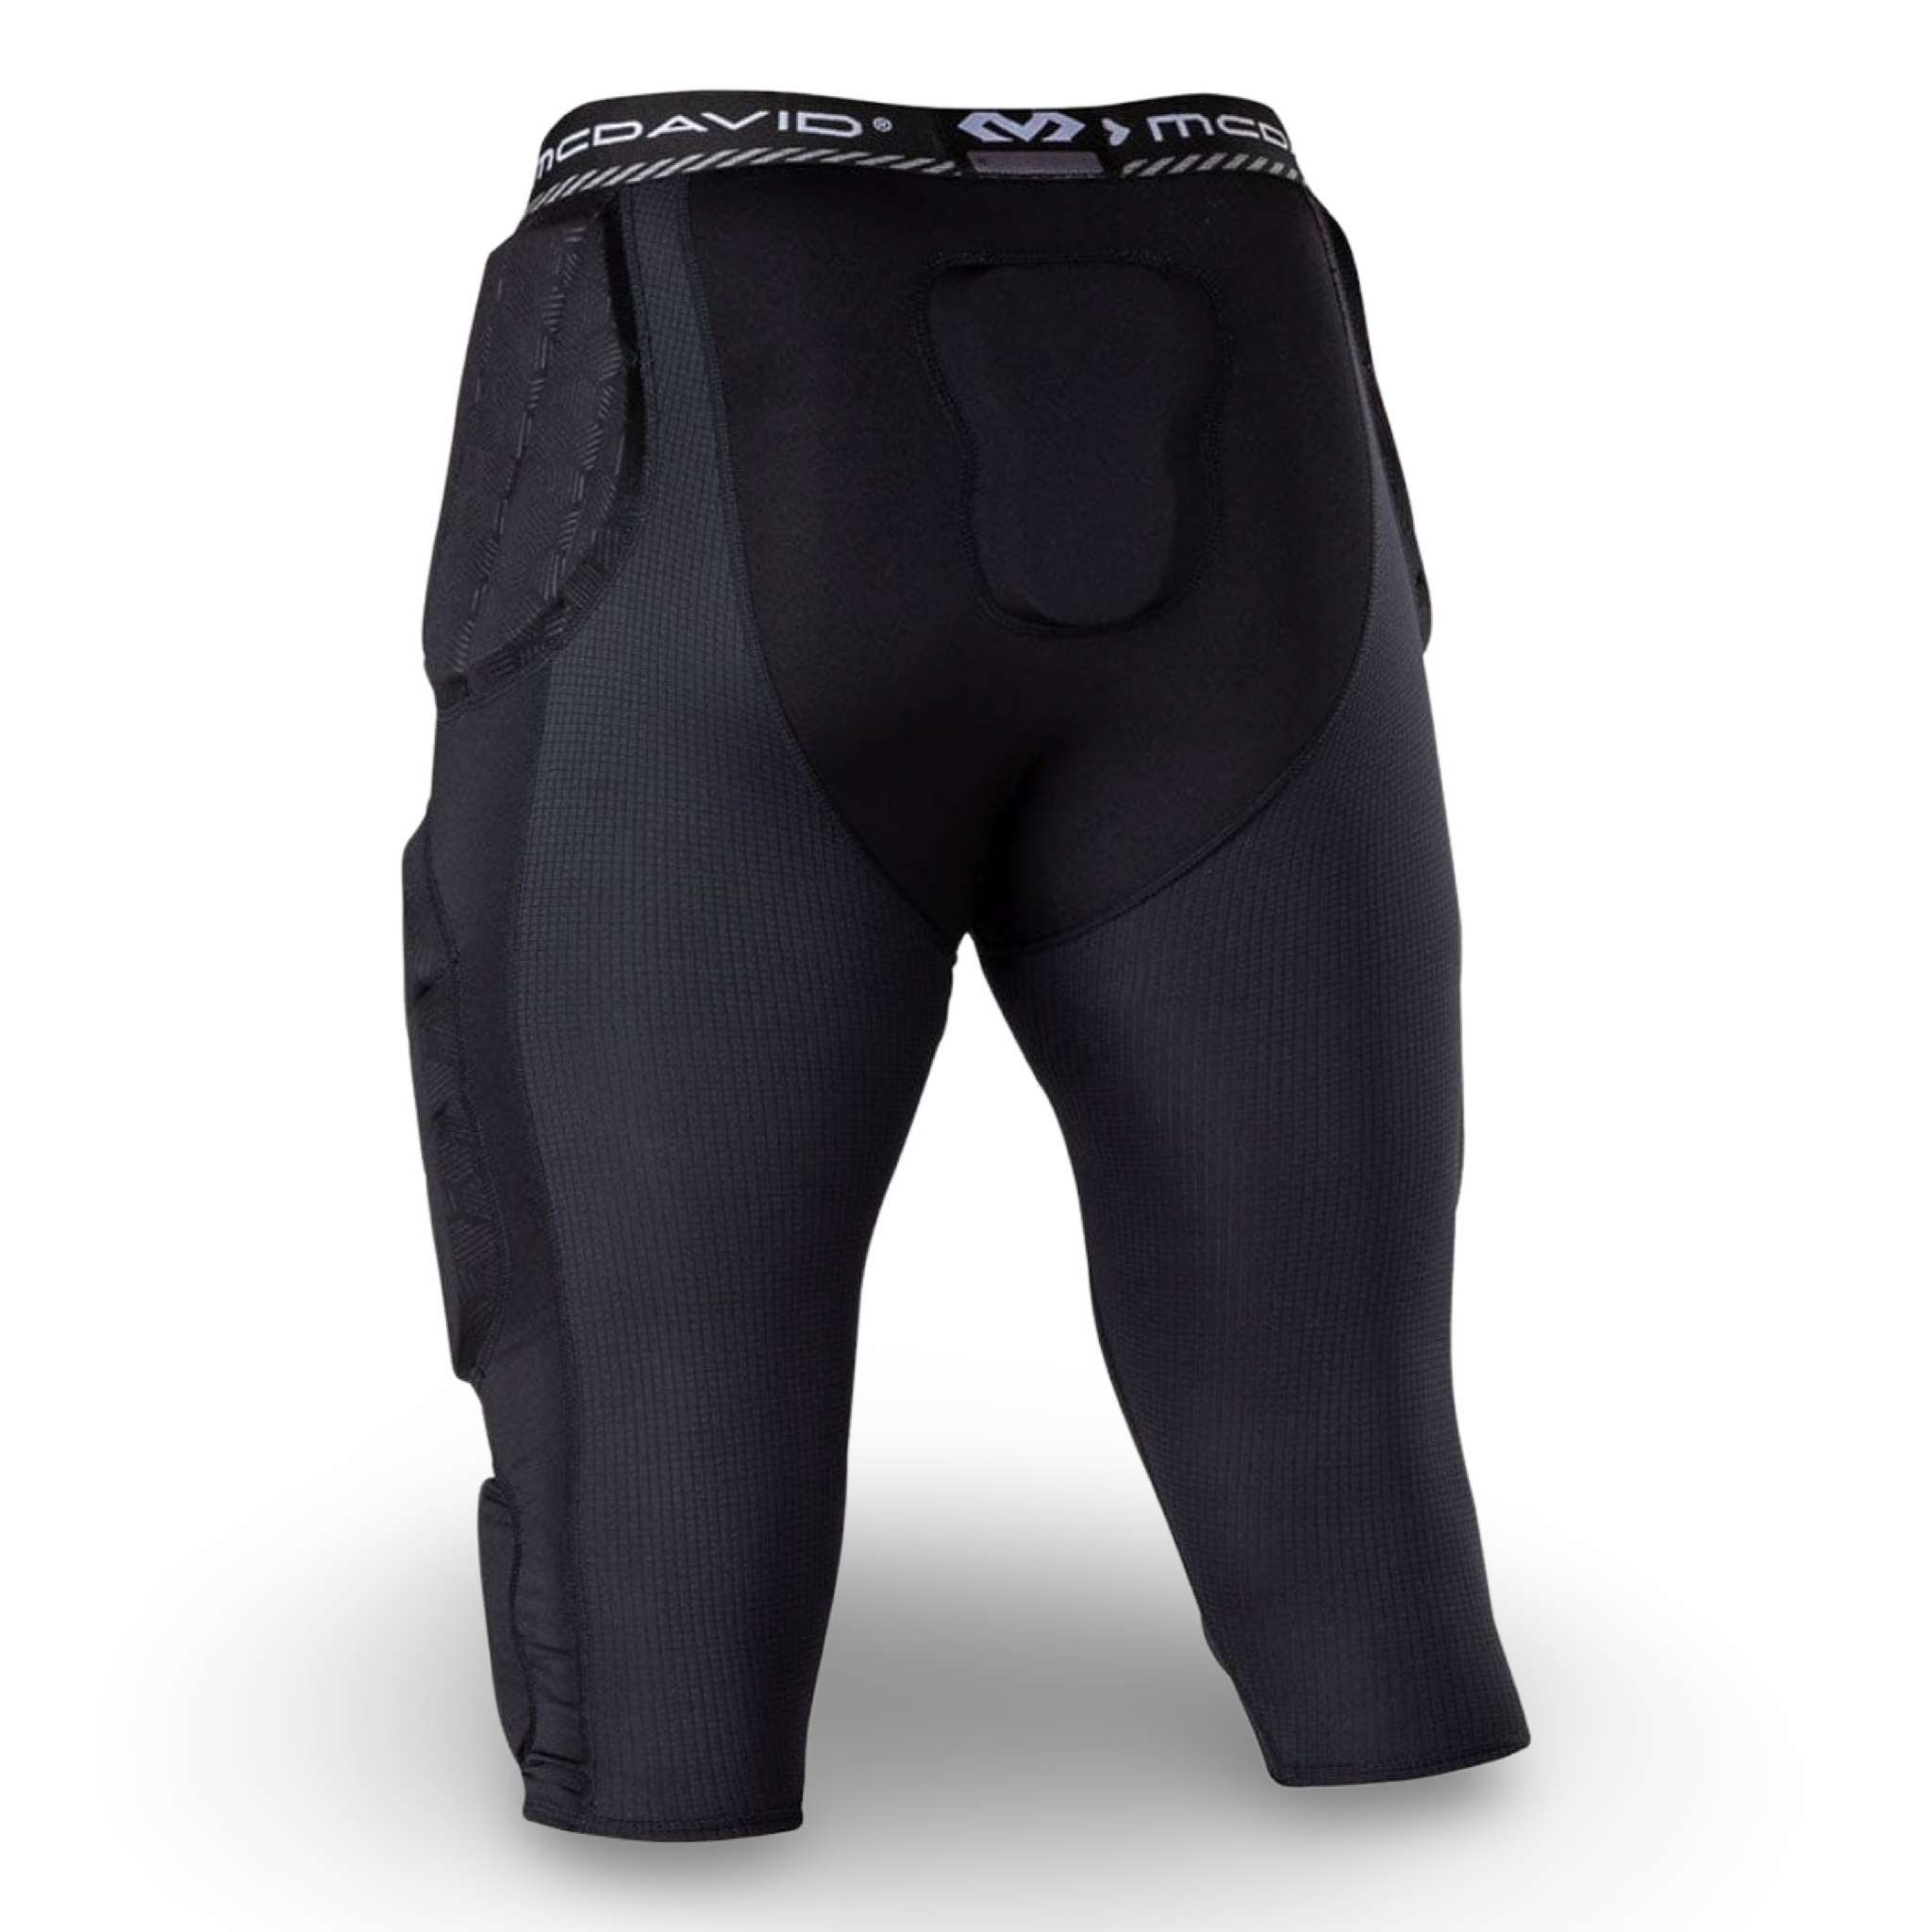 MD Rival™ 7-Pad ¾ Football Girdle - Adult &amp; Youth